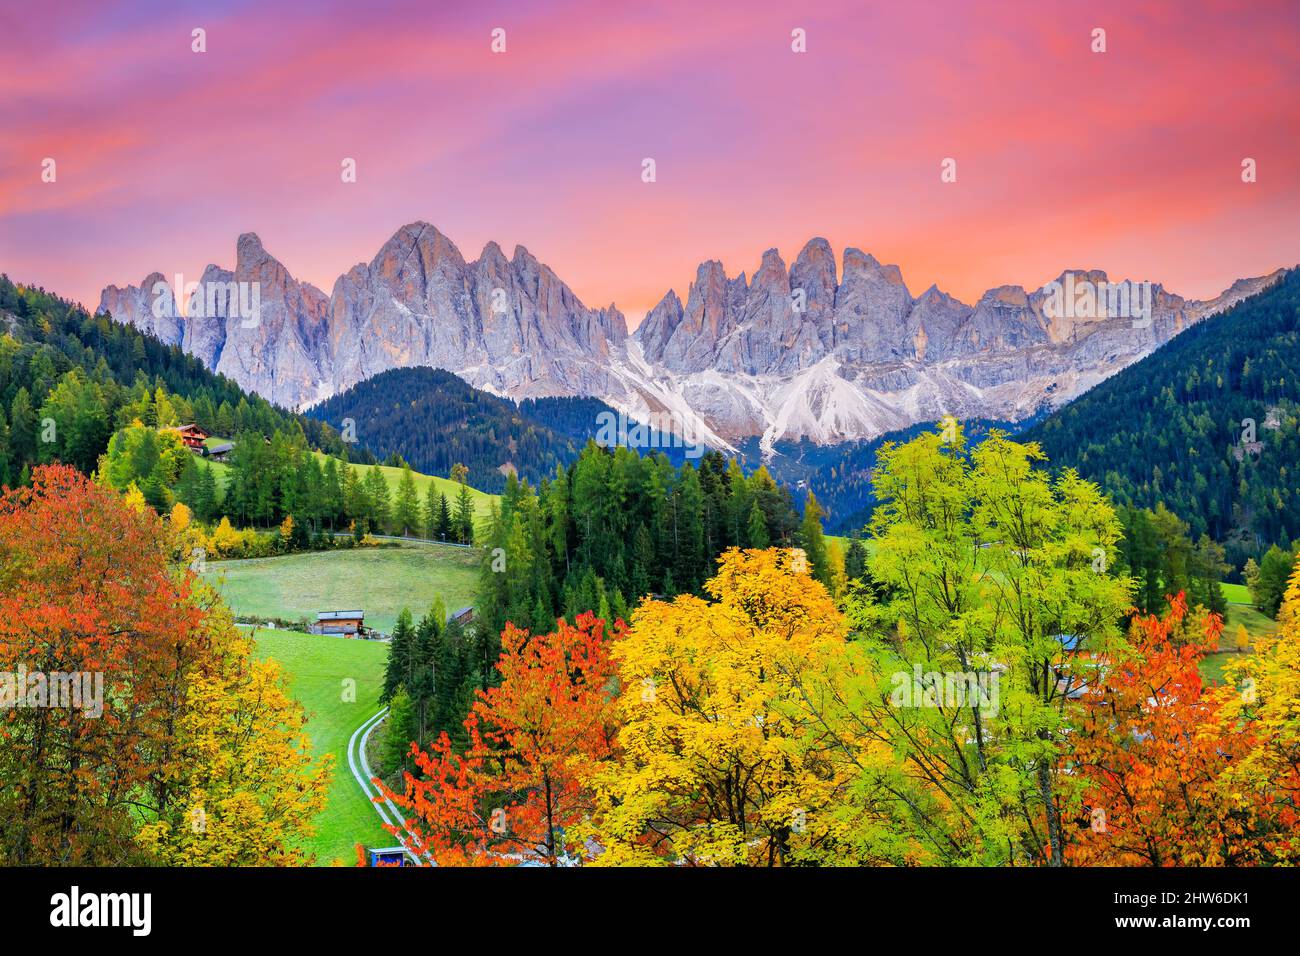 Val di Funes, Dolomites, Italy. Santa Maddalena village in front of the Odle(Geisler) mountain group. Stock Photo